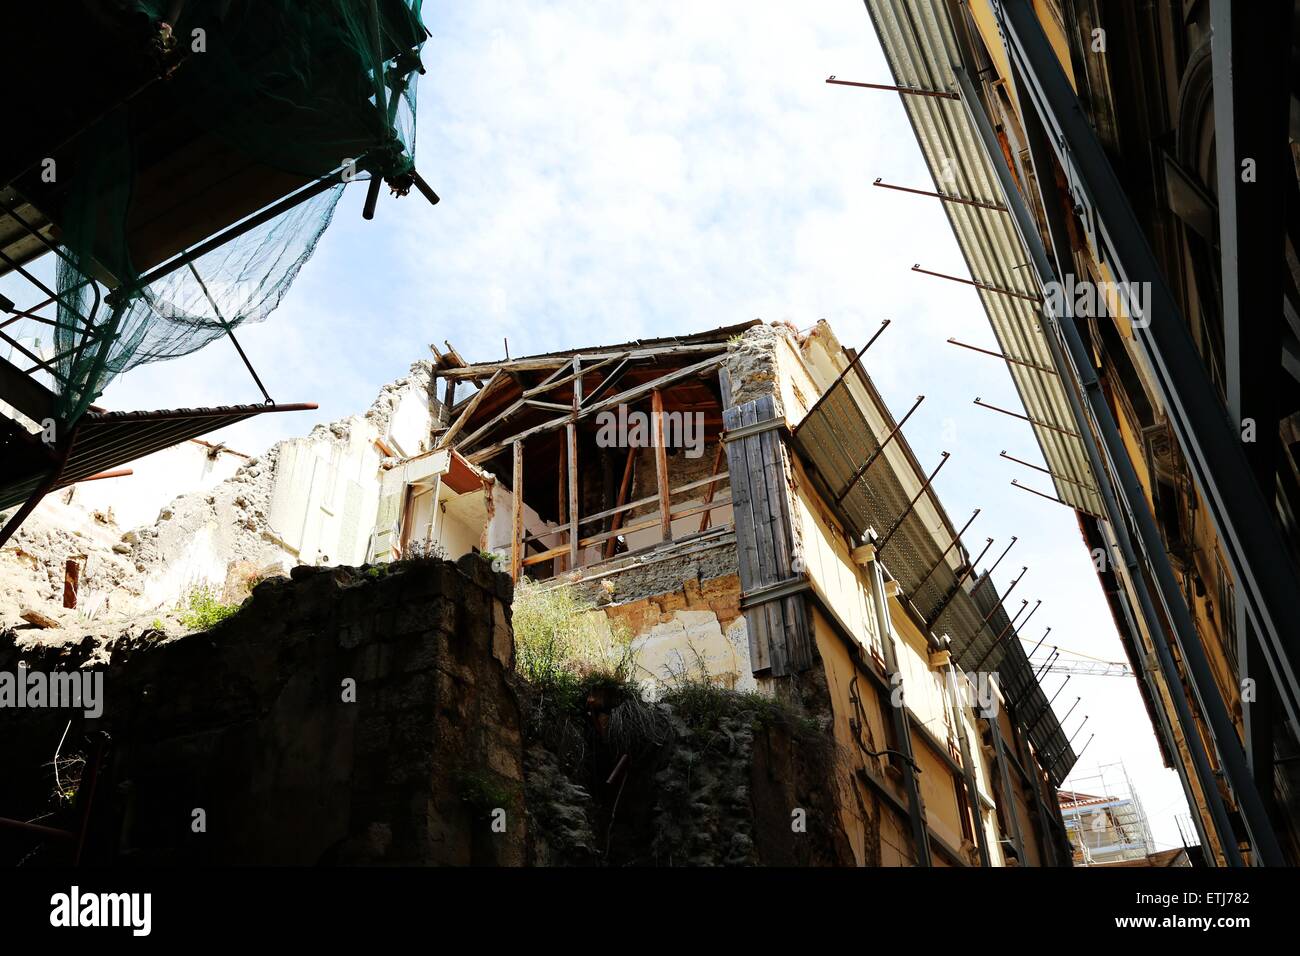 L'aquila. 12th June, 2015. Damaged buildings are seen in central Italy's old town of L'Aquila, on June 12, 2015. Six years after a devastating earthquake killed 309 people in April 2009, this mid-sized medieval city of about 70,000 residents in central Italy was still struggling to recover fully, and ever more to restore its past beauty, and its identity with it. © Luo Na/Xinhua/Alamy Live News Stock Photo